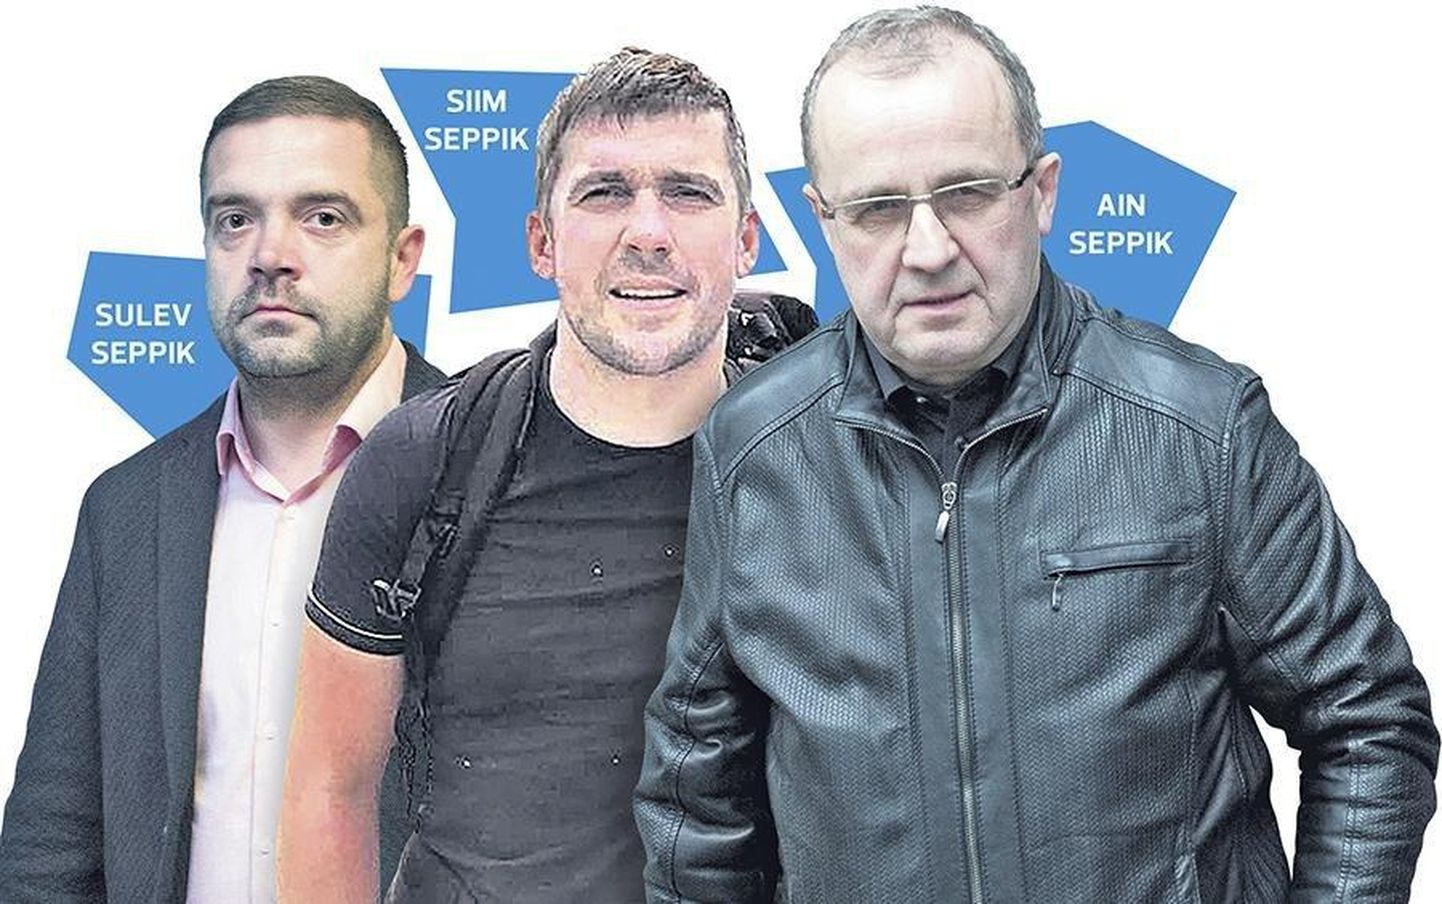 The Central Criminal Police on Tuesday detained former Interior Minister Ain Seppik (69) and his sons Siim Seppik (42) and Sulev Seppik (46) on suspicions of offering a bribe and their business partner.